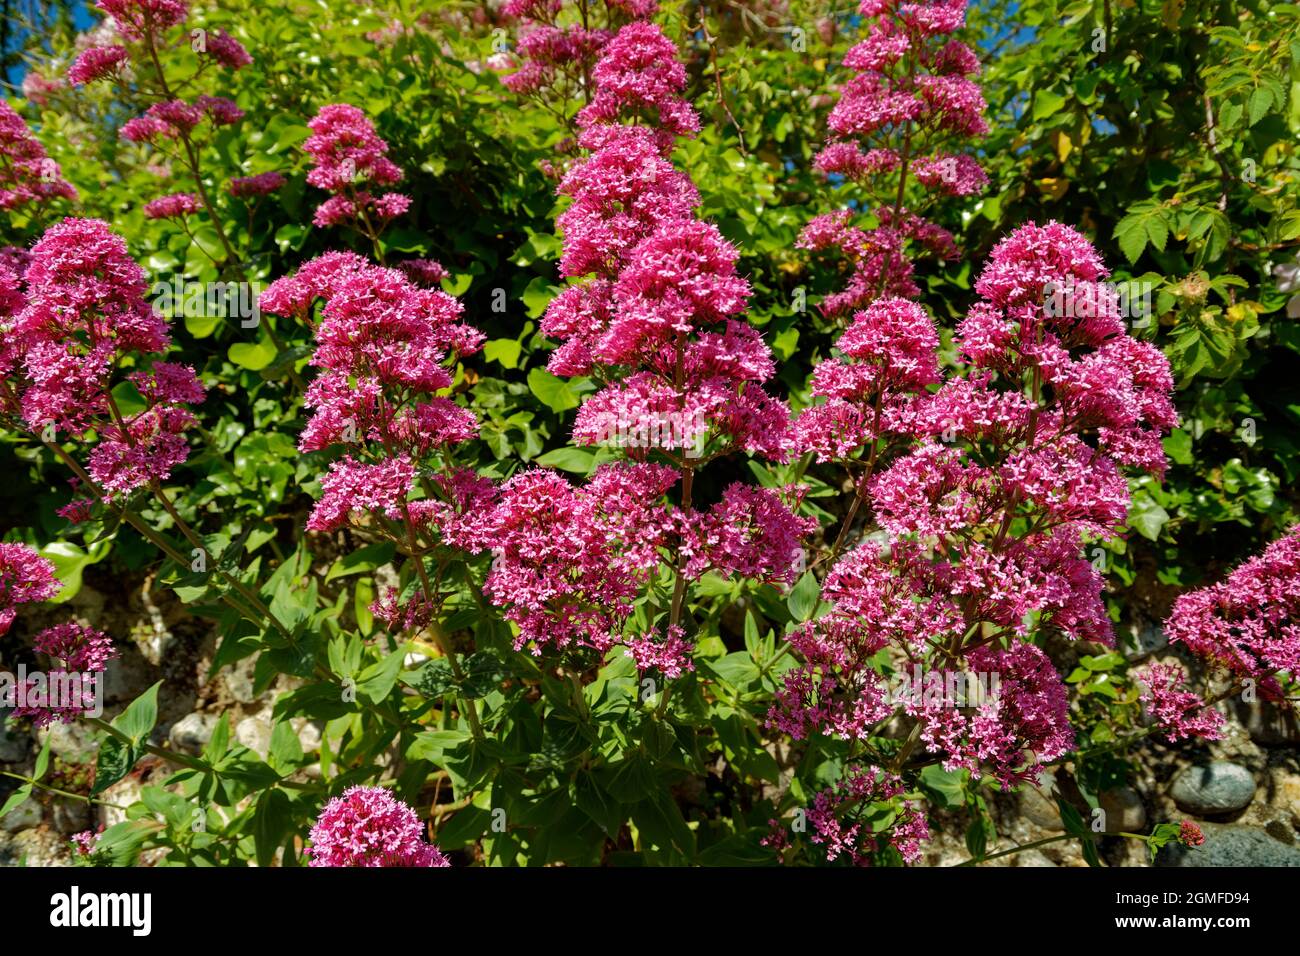 Red Valerian or Centranthus ruber flowers. Stock Photo